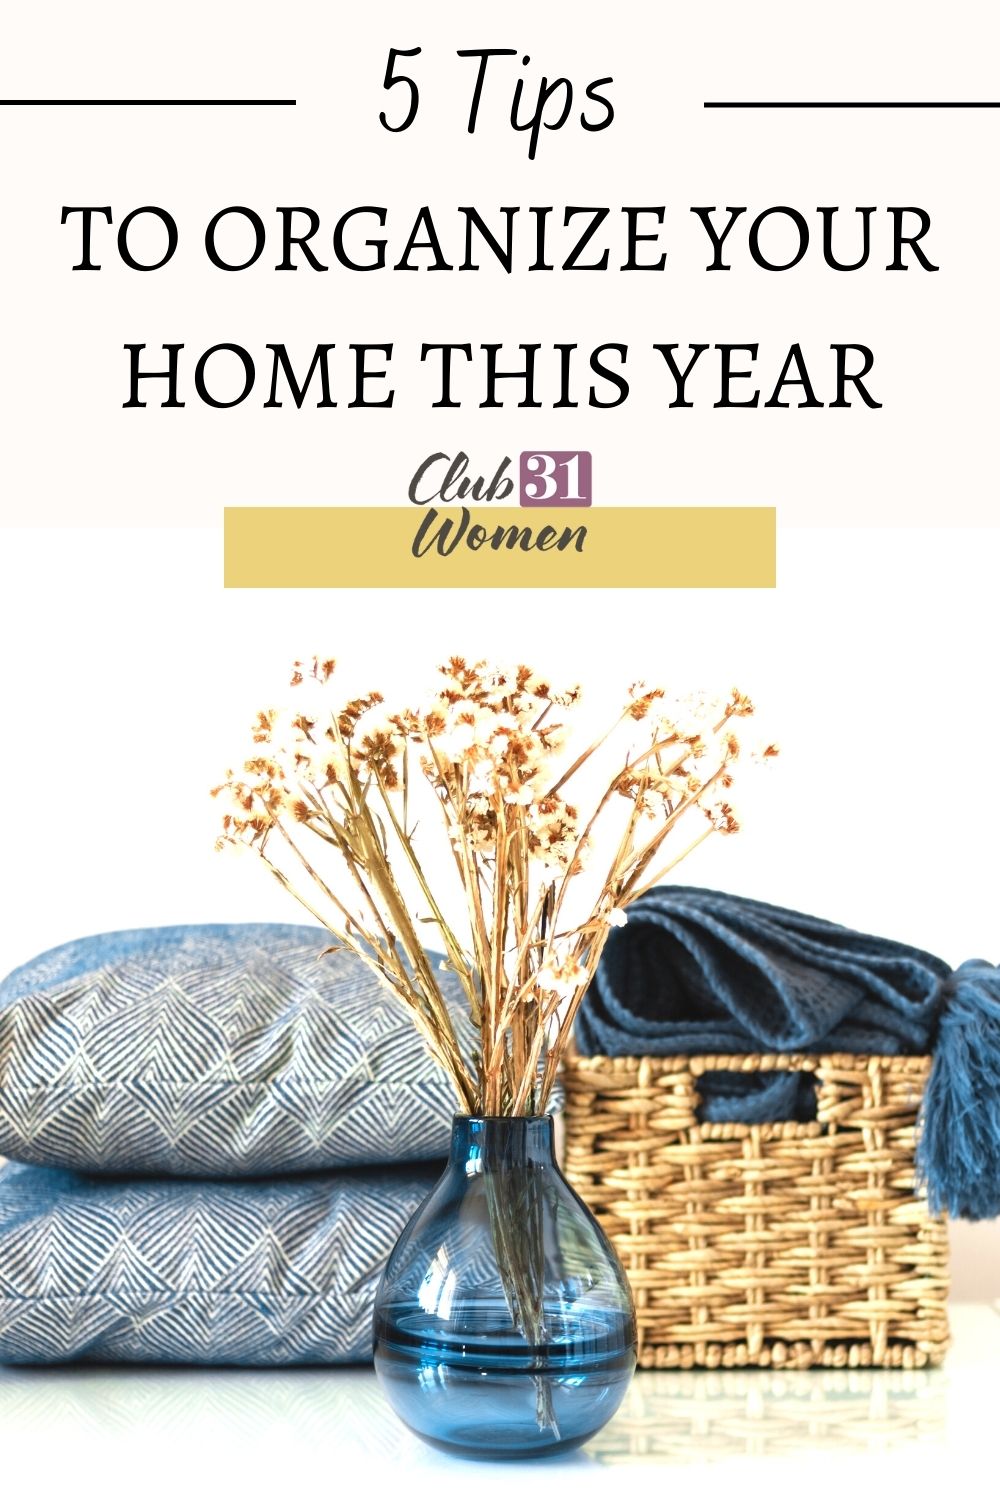 Are you looking for some tips to organize your home? Let this be the year you let go of clutter and enjoy peace. via @Club31Women